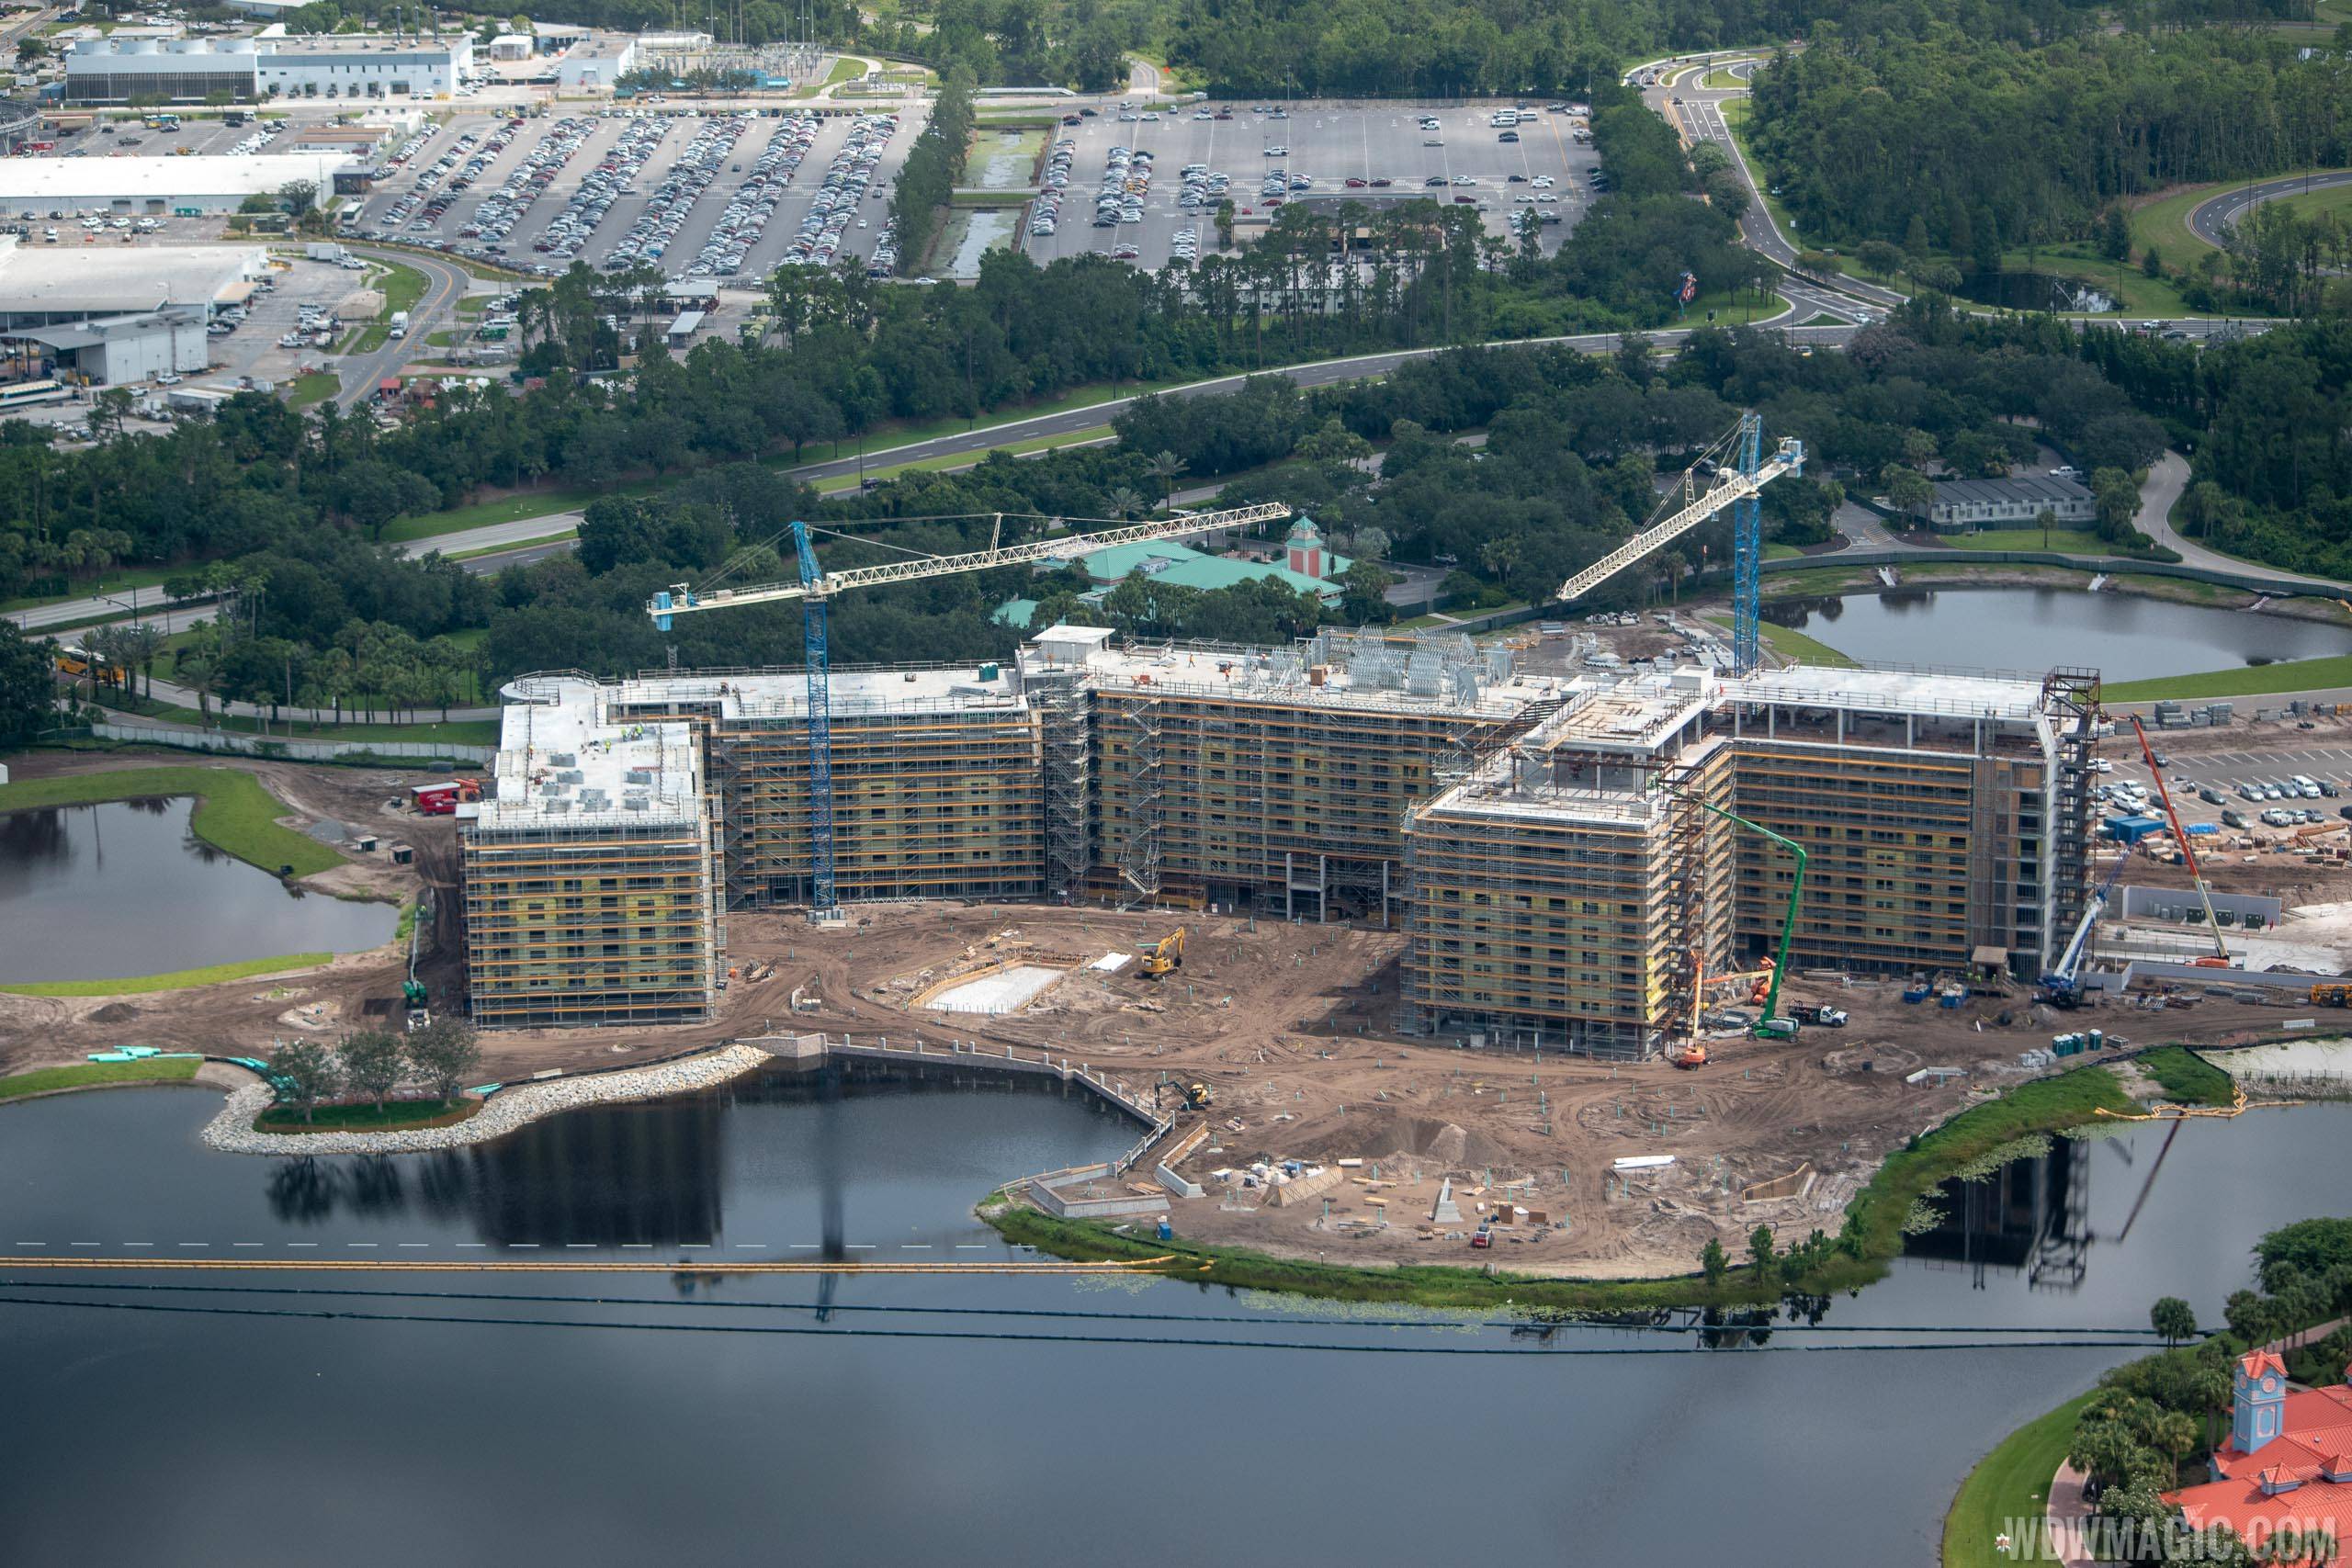 PHOTOS - Aerial view of the Disney Riviera Resort construction near Epcot